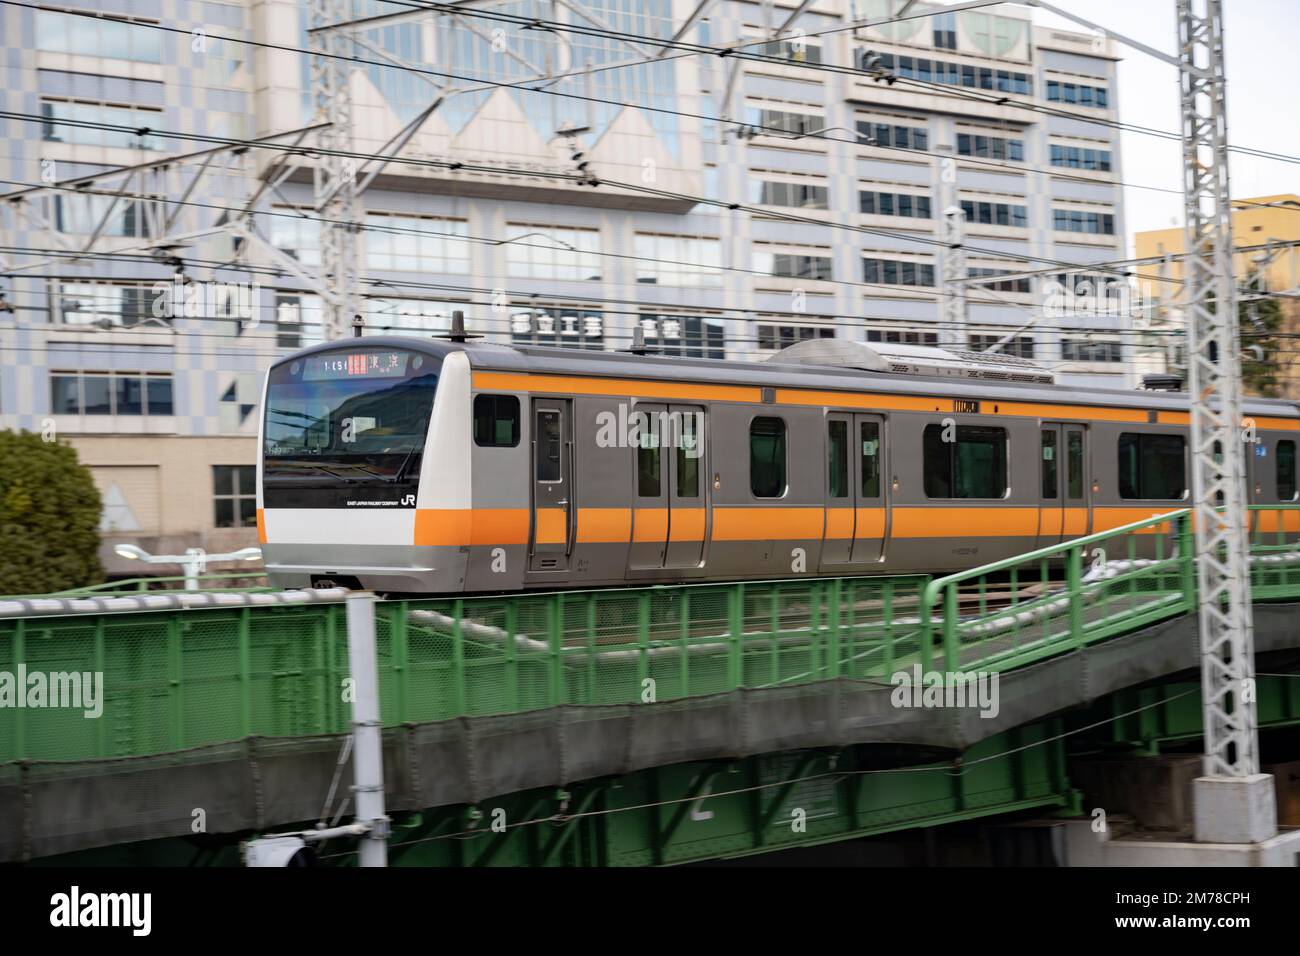 Tokyo, Japan. 6th Jan, 2023. A Chuo Line Rapid train at JR Sudiobashi Station.The JR East Chuo Line is a railway line in Japan operated by East Japan Railway Company (JR East). It runs from Tokyo Station in central Tokyo to Takao Station in the west, passing through major cities such as Yokohama, Hachioji, and Ome. The Chuo Line is colored orange on JR East train maps and is known for its rapid service, with trains reaching speeds of up to 130 km/h. It is used by commuters and tourists for travel to popular destinations such as Mount Takao, the Tama area, and the Fuji Five Lakes region. Th Stock Photo